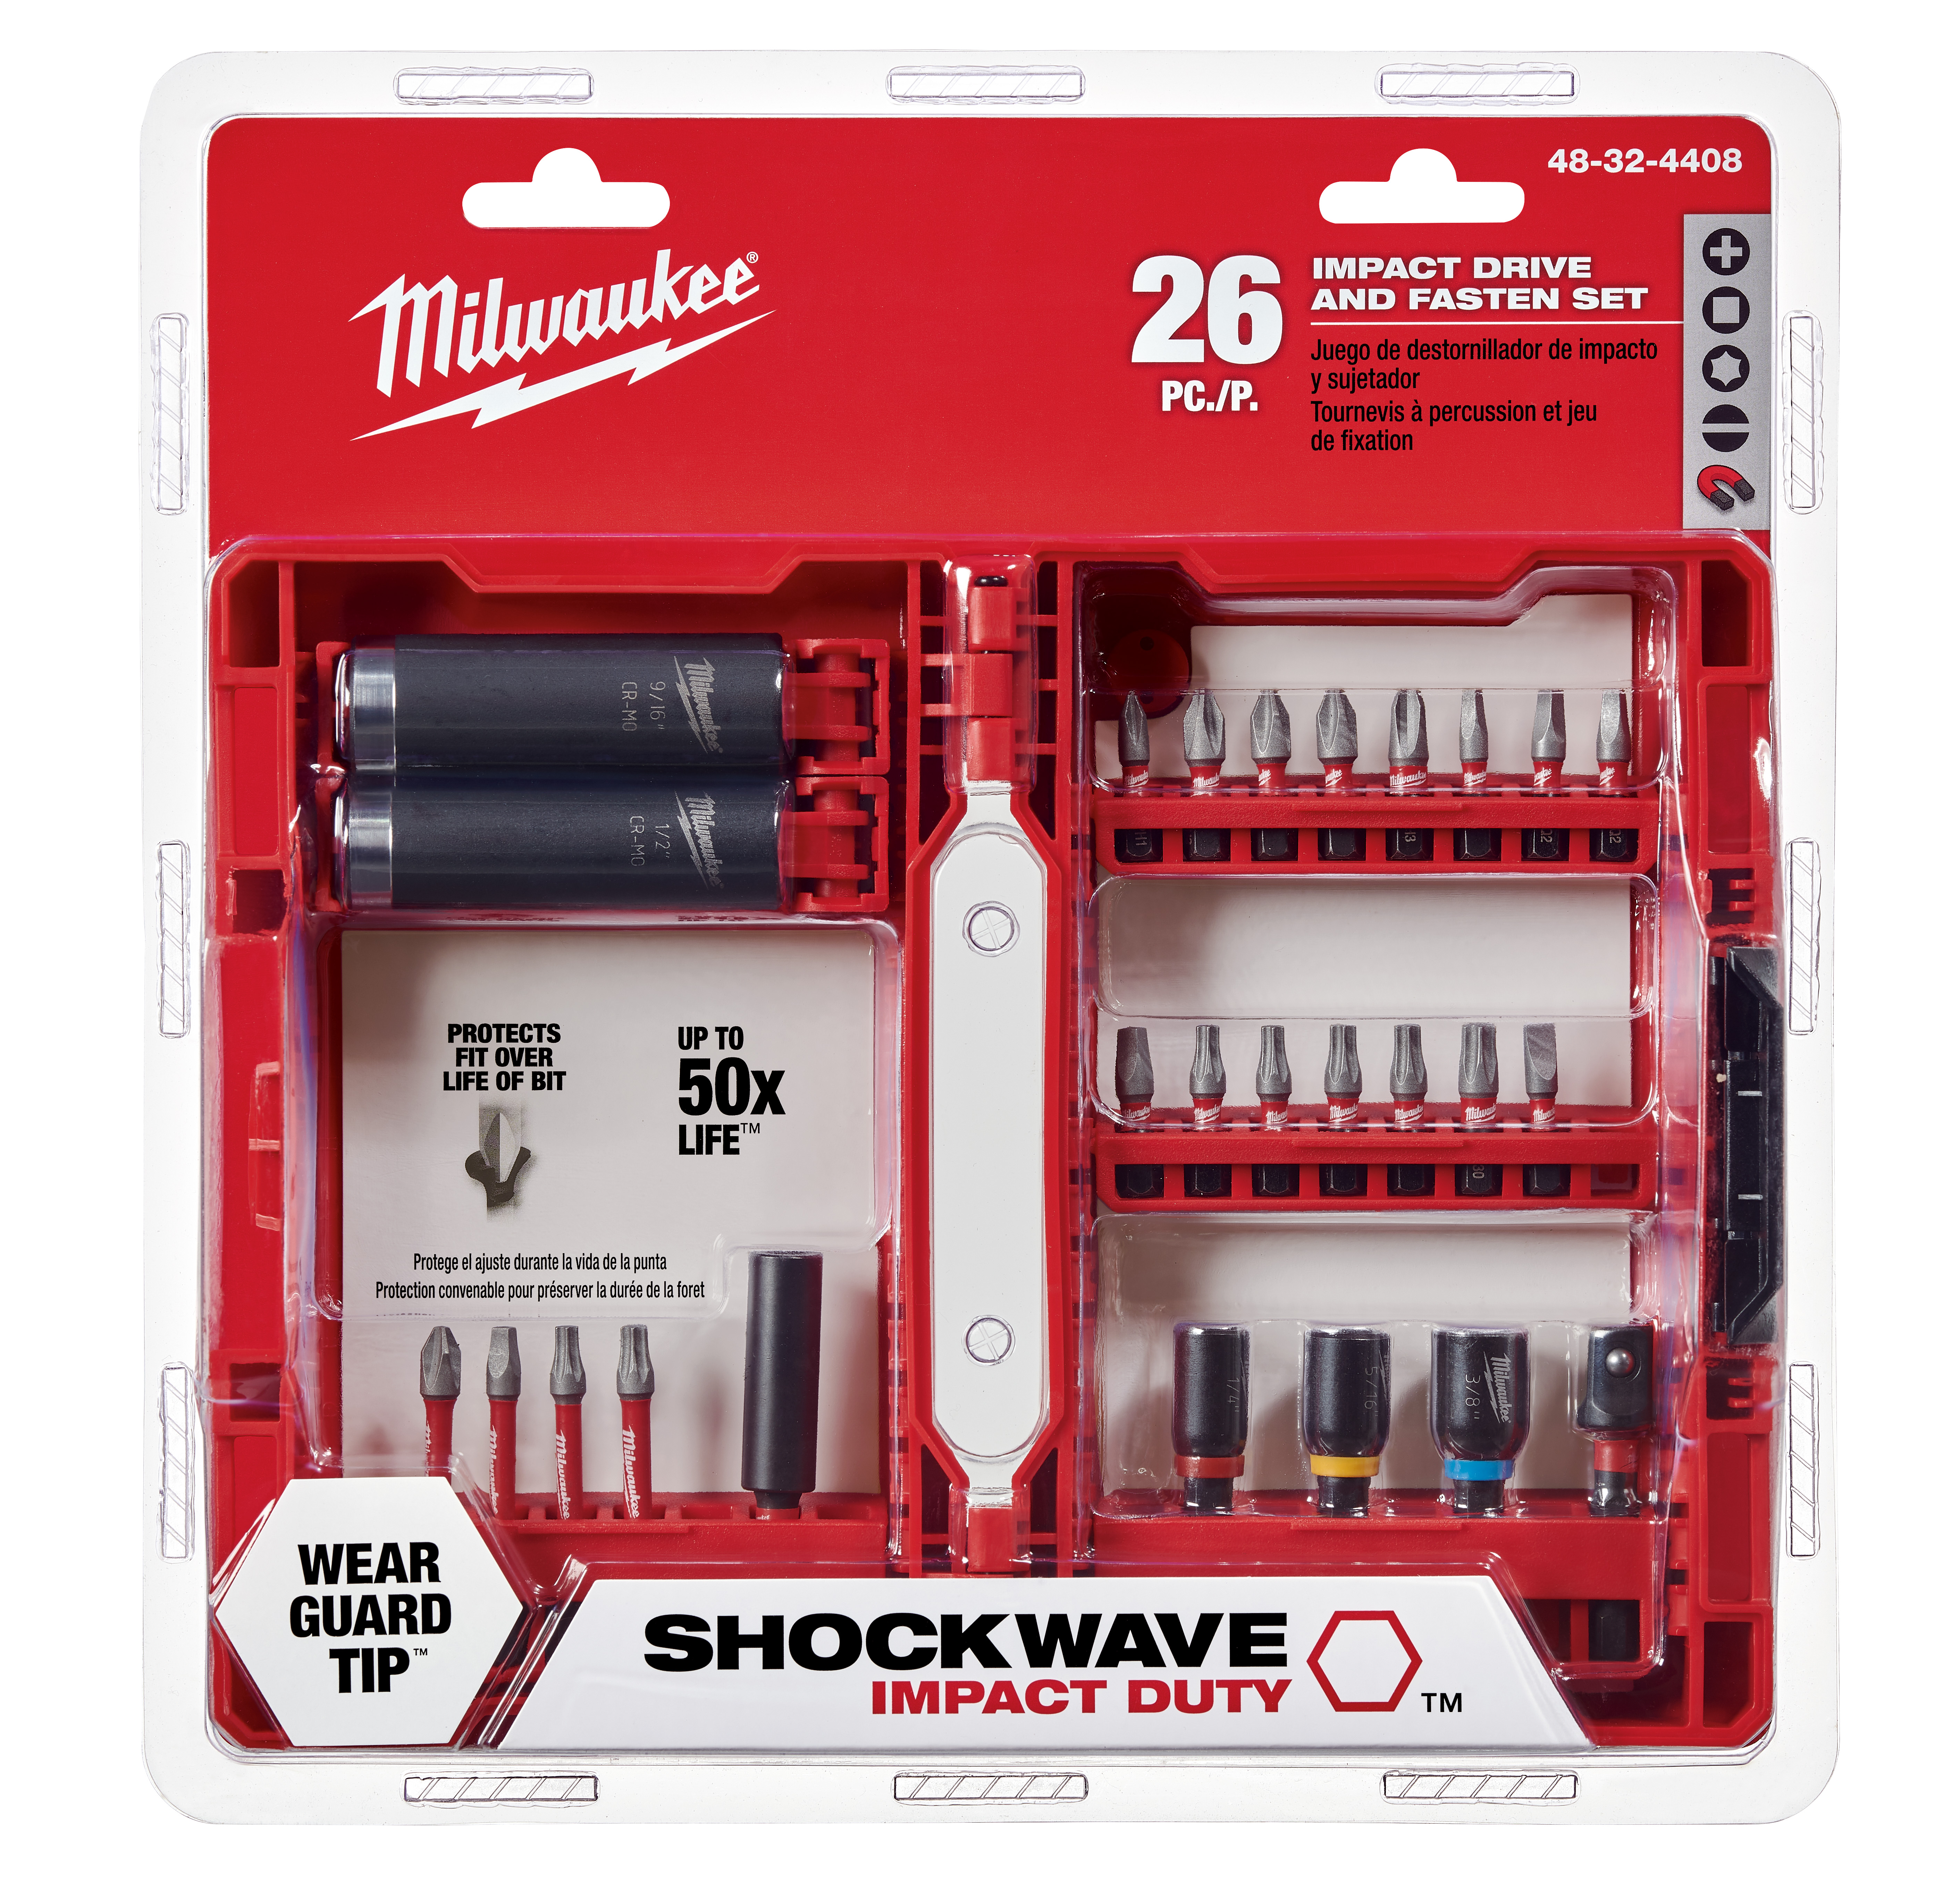 Milwaukee® SHOCKWAVE™ Impact Duty™ 48-32-4403 18-Piece Driver Bit Set, #1, #2, #3, 3/16 in, T15, T20 Phillips®/Slotted/Square/Torx® Point, 1 in, 2 in, 3-1/2 in OAL, 1/4 in, Steel